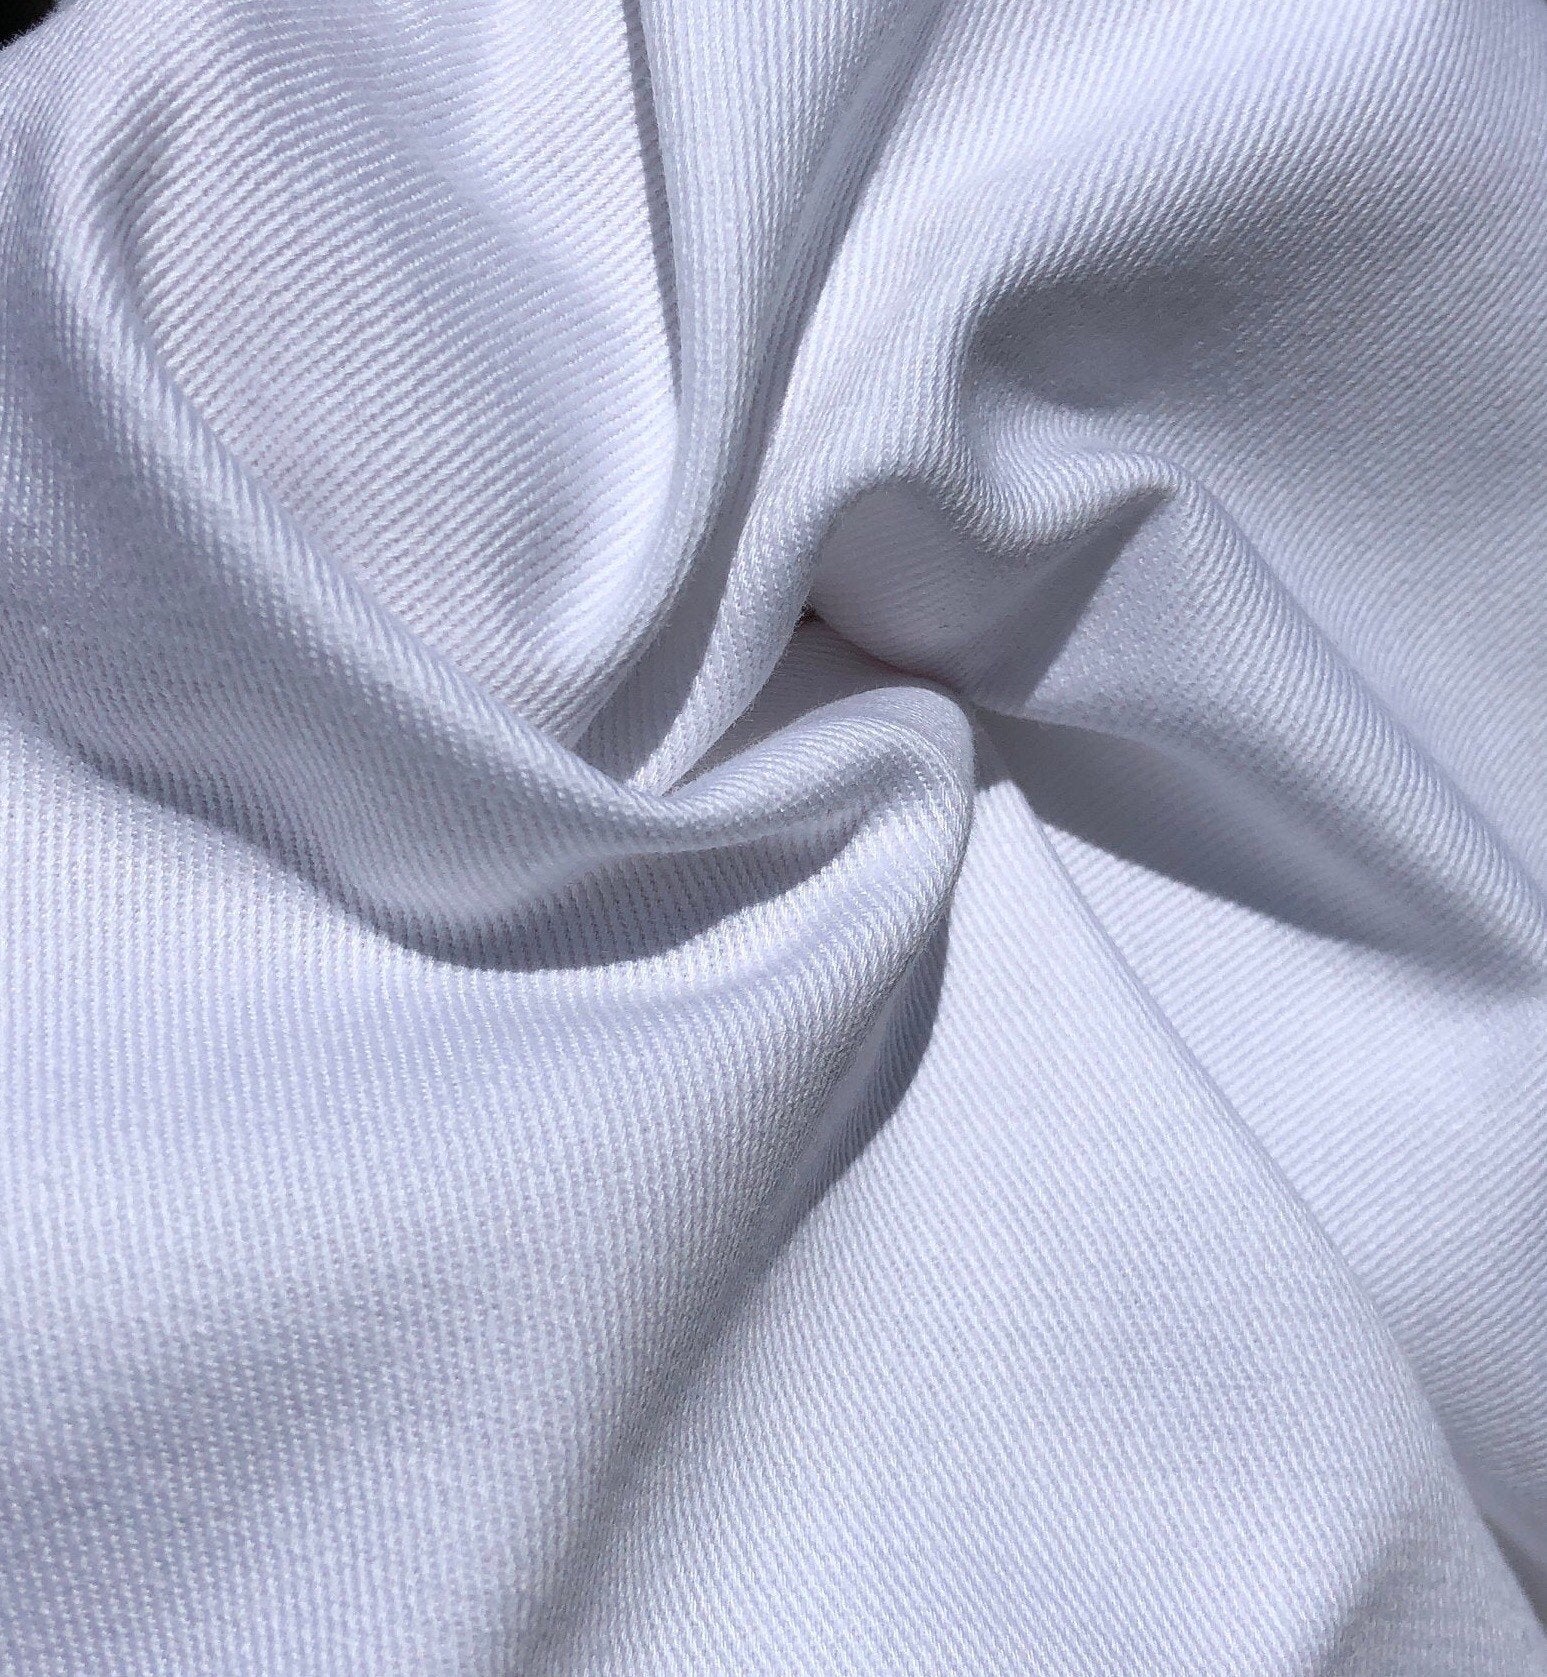 60 100% Cotton Twill 7 OZ Optic White Apparel Woven Fabric By the